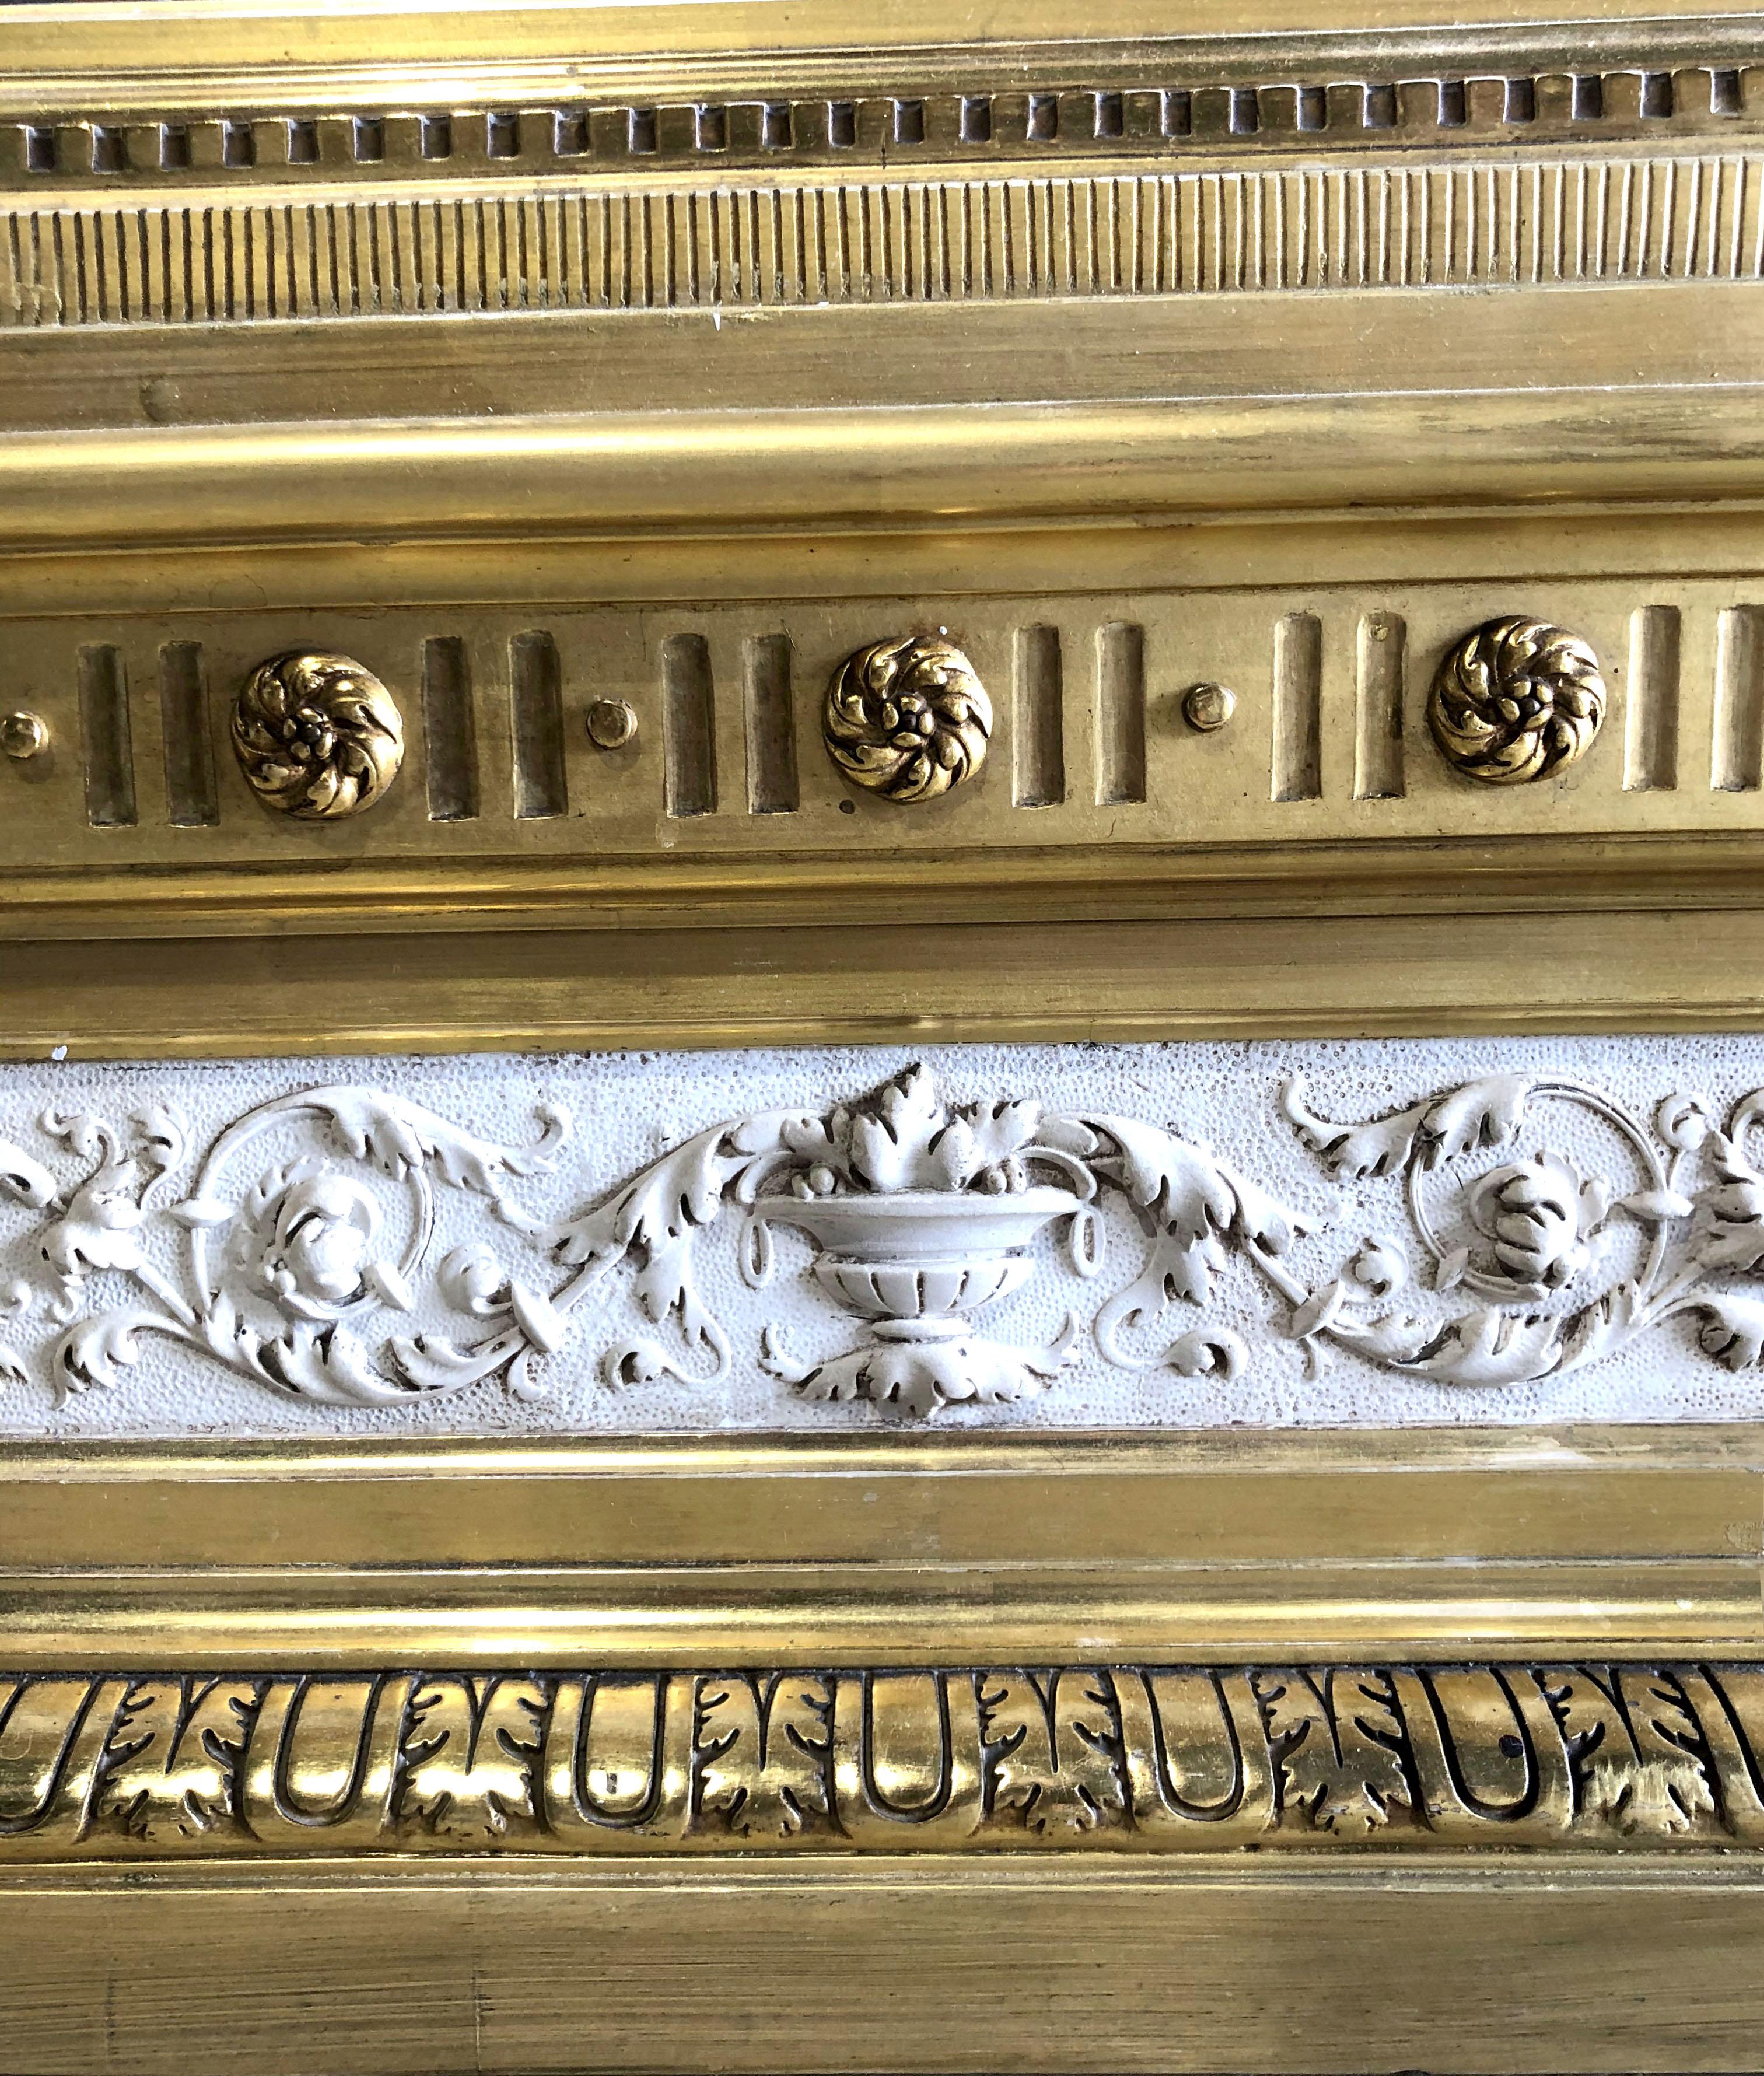 The monumental size mirror (glass plate replaced) with carved and gilded moldings above a plaster frieze and flanked by columns- original water gilding- minor restorations- excellent condition, early 19th century.